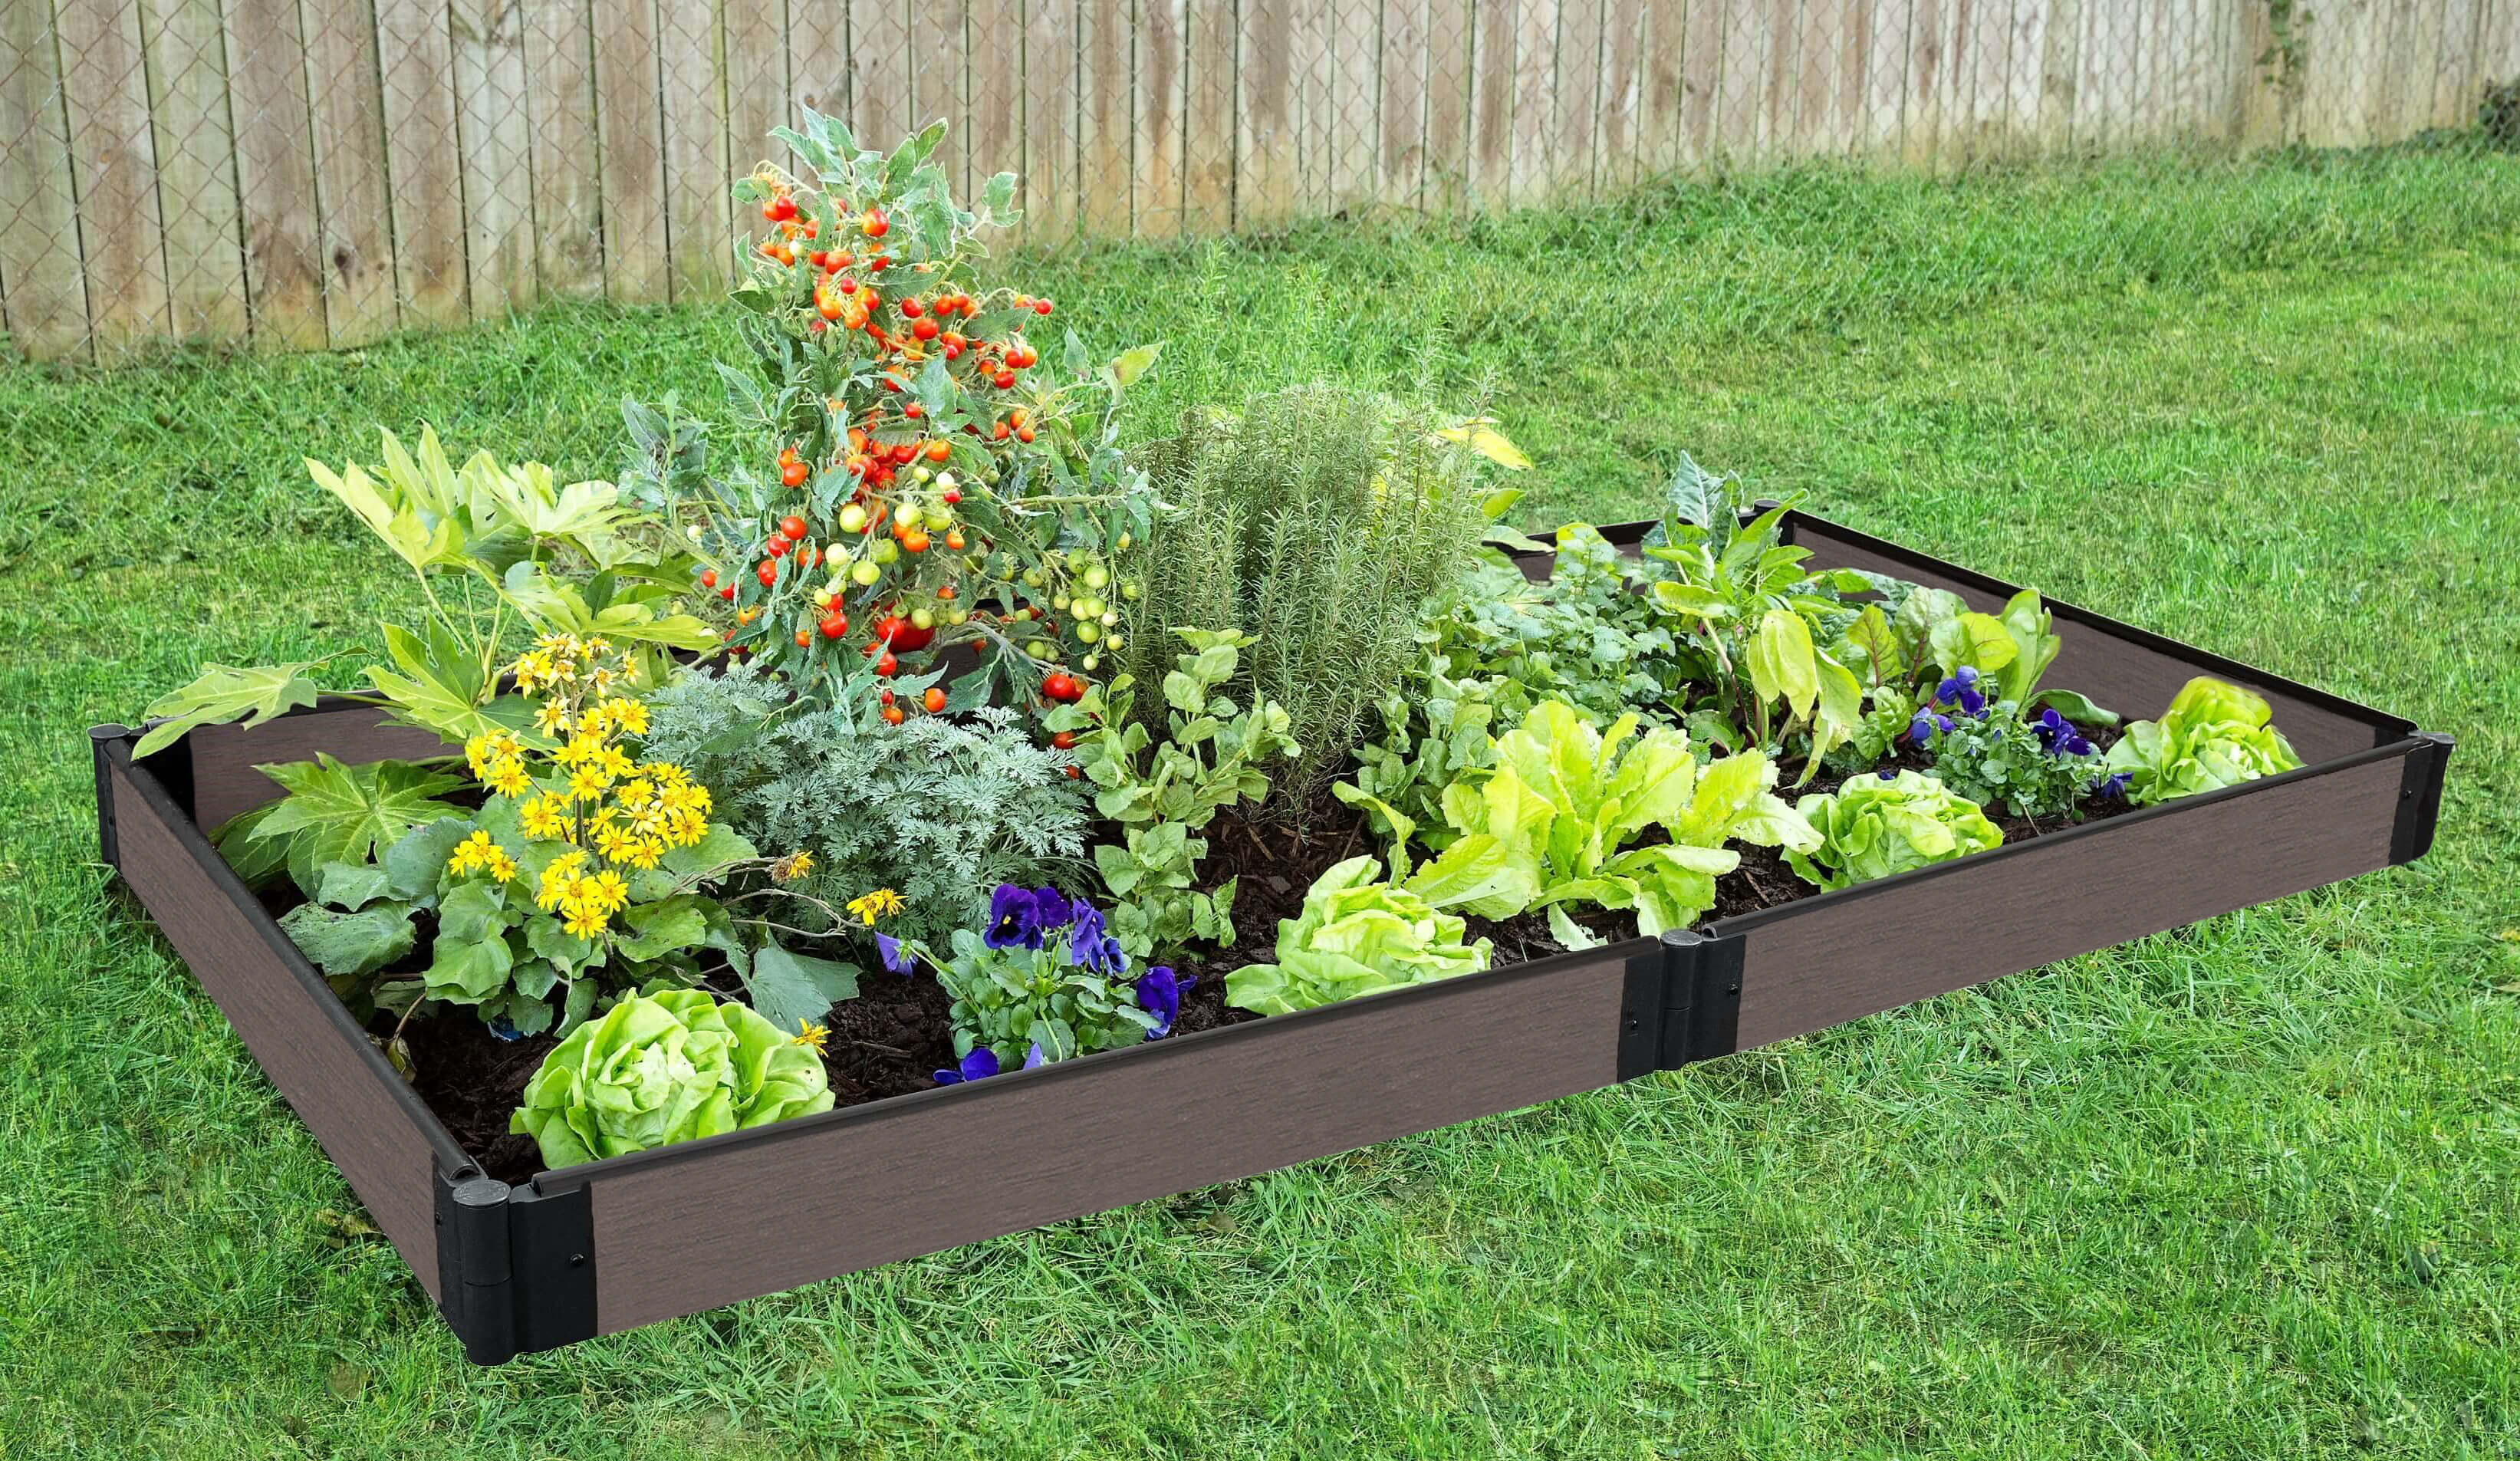 Frame It All Tool-Free Weathered Wood Raised Garden Bed 4' x 8' x 5.5" - 1" profile